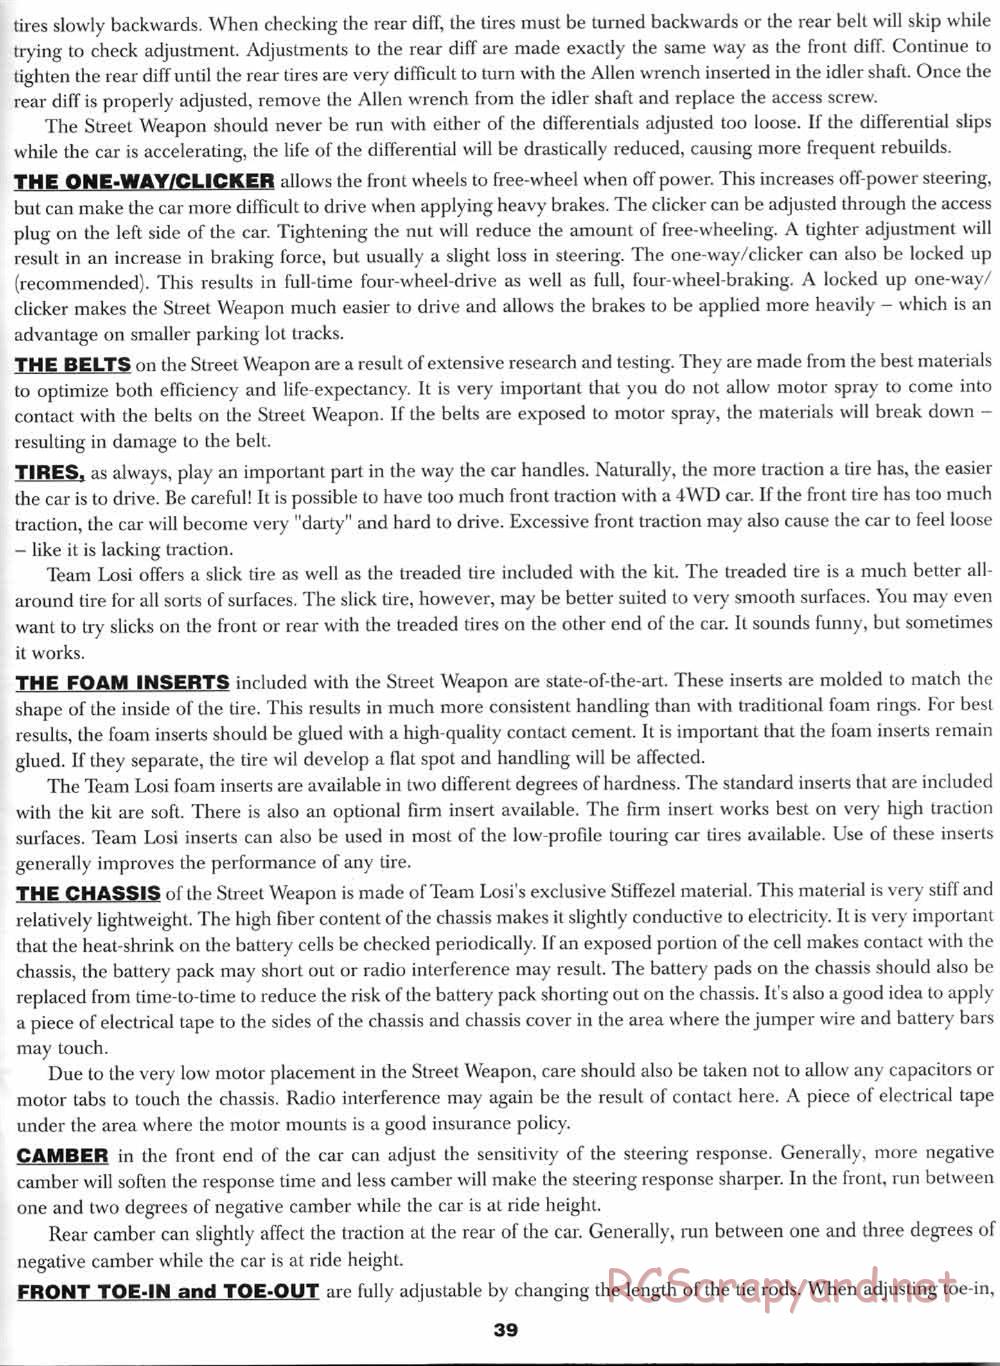 Team Losi - Street Weapon - Manual - Page 42